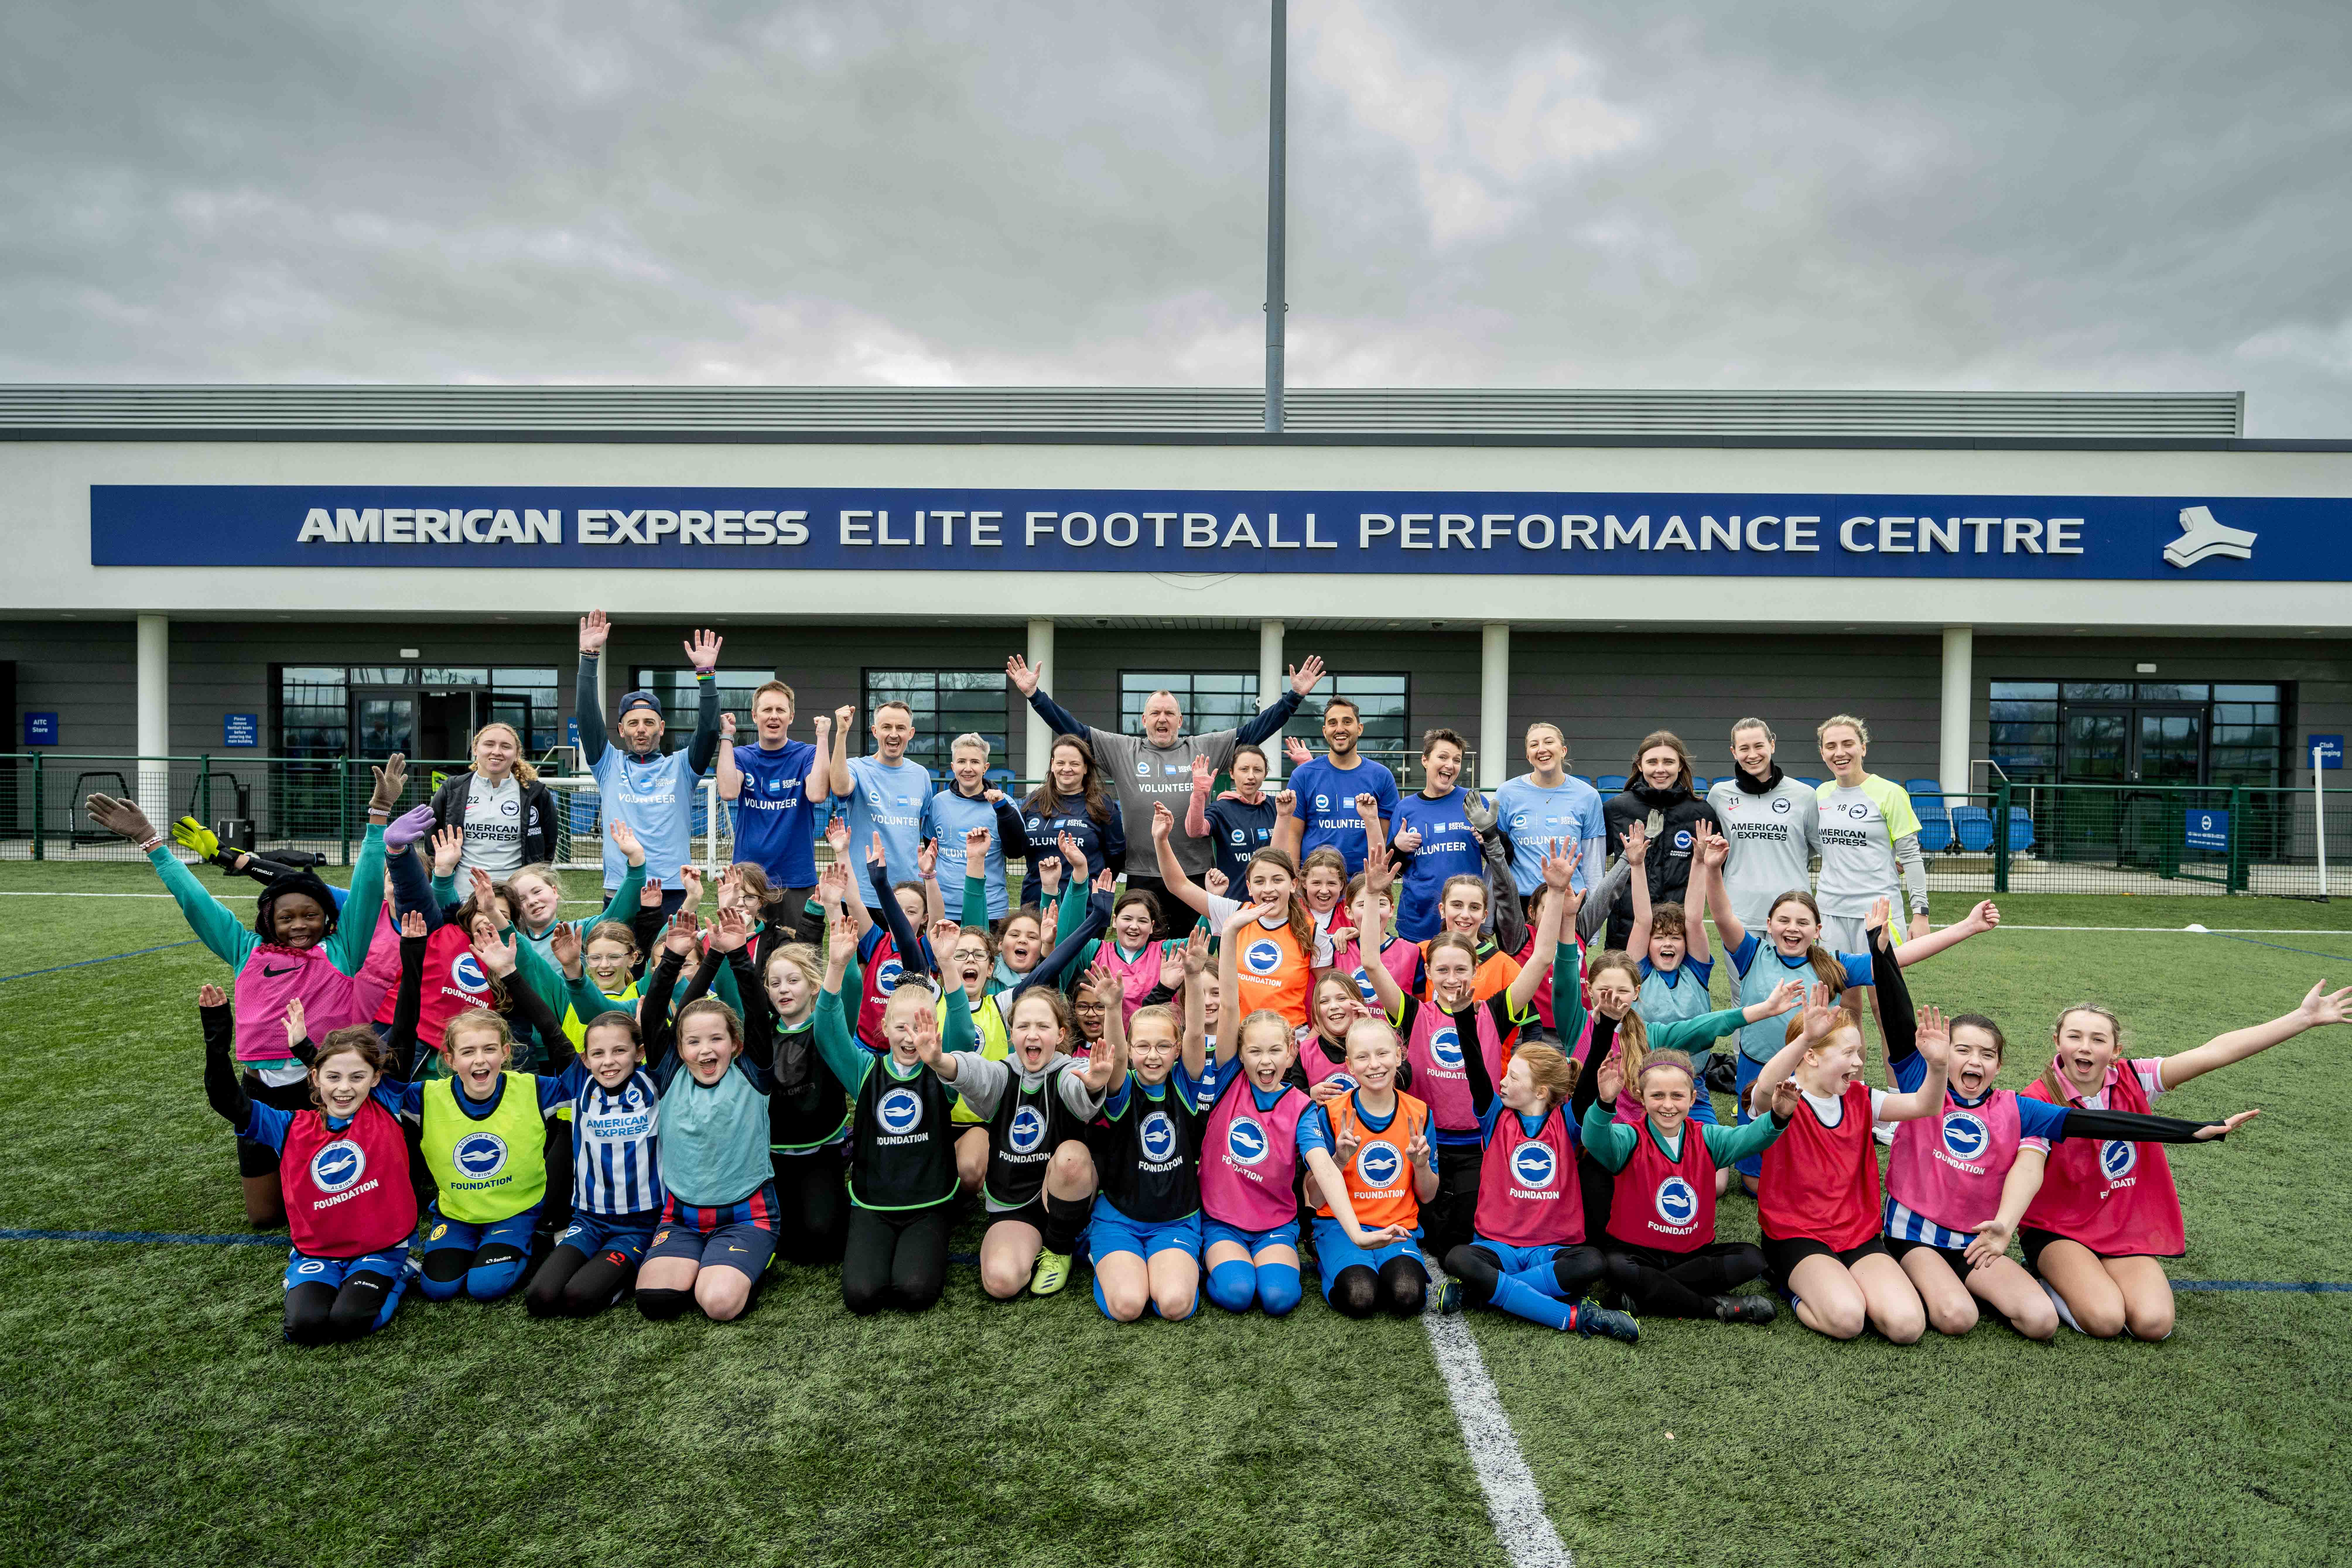 Local girls encouraged to try out football